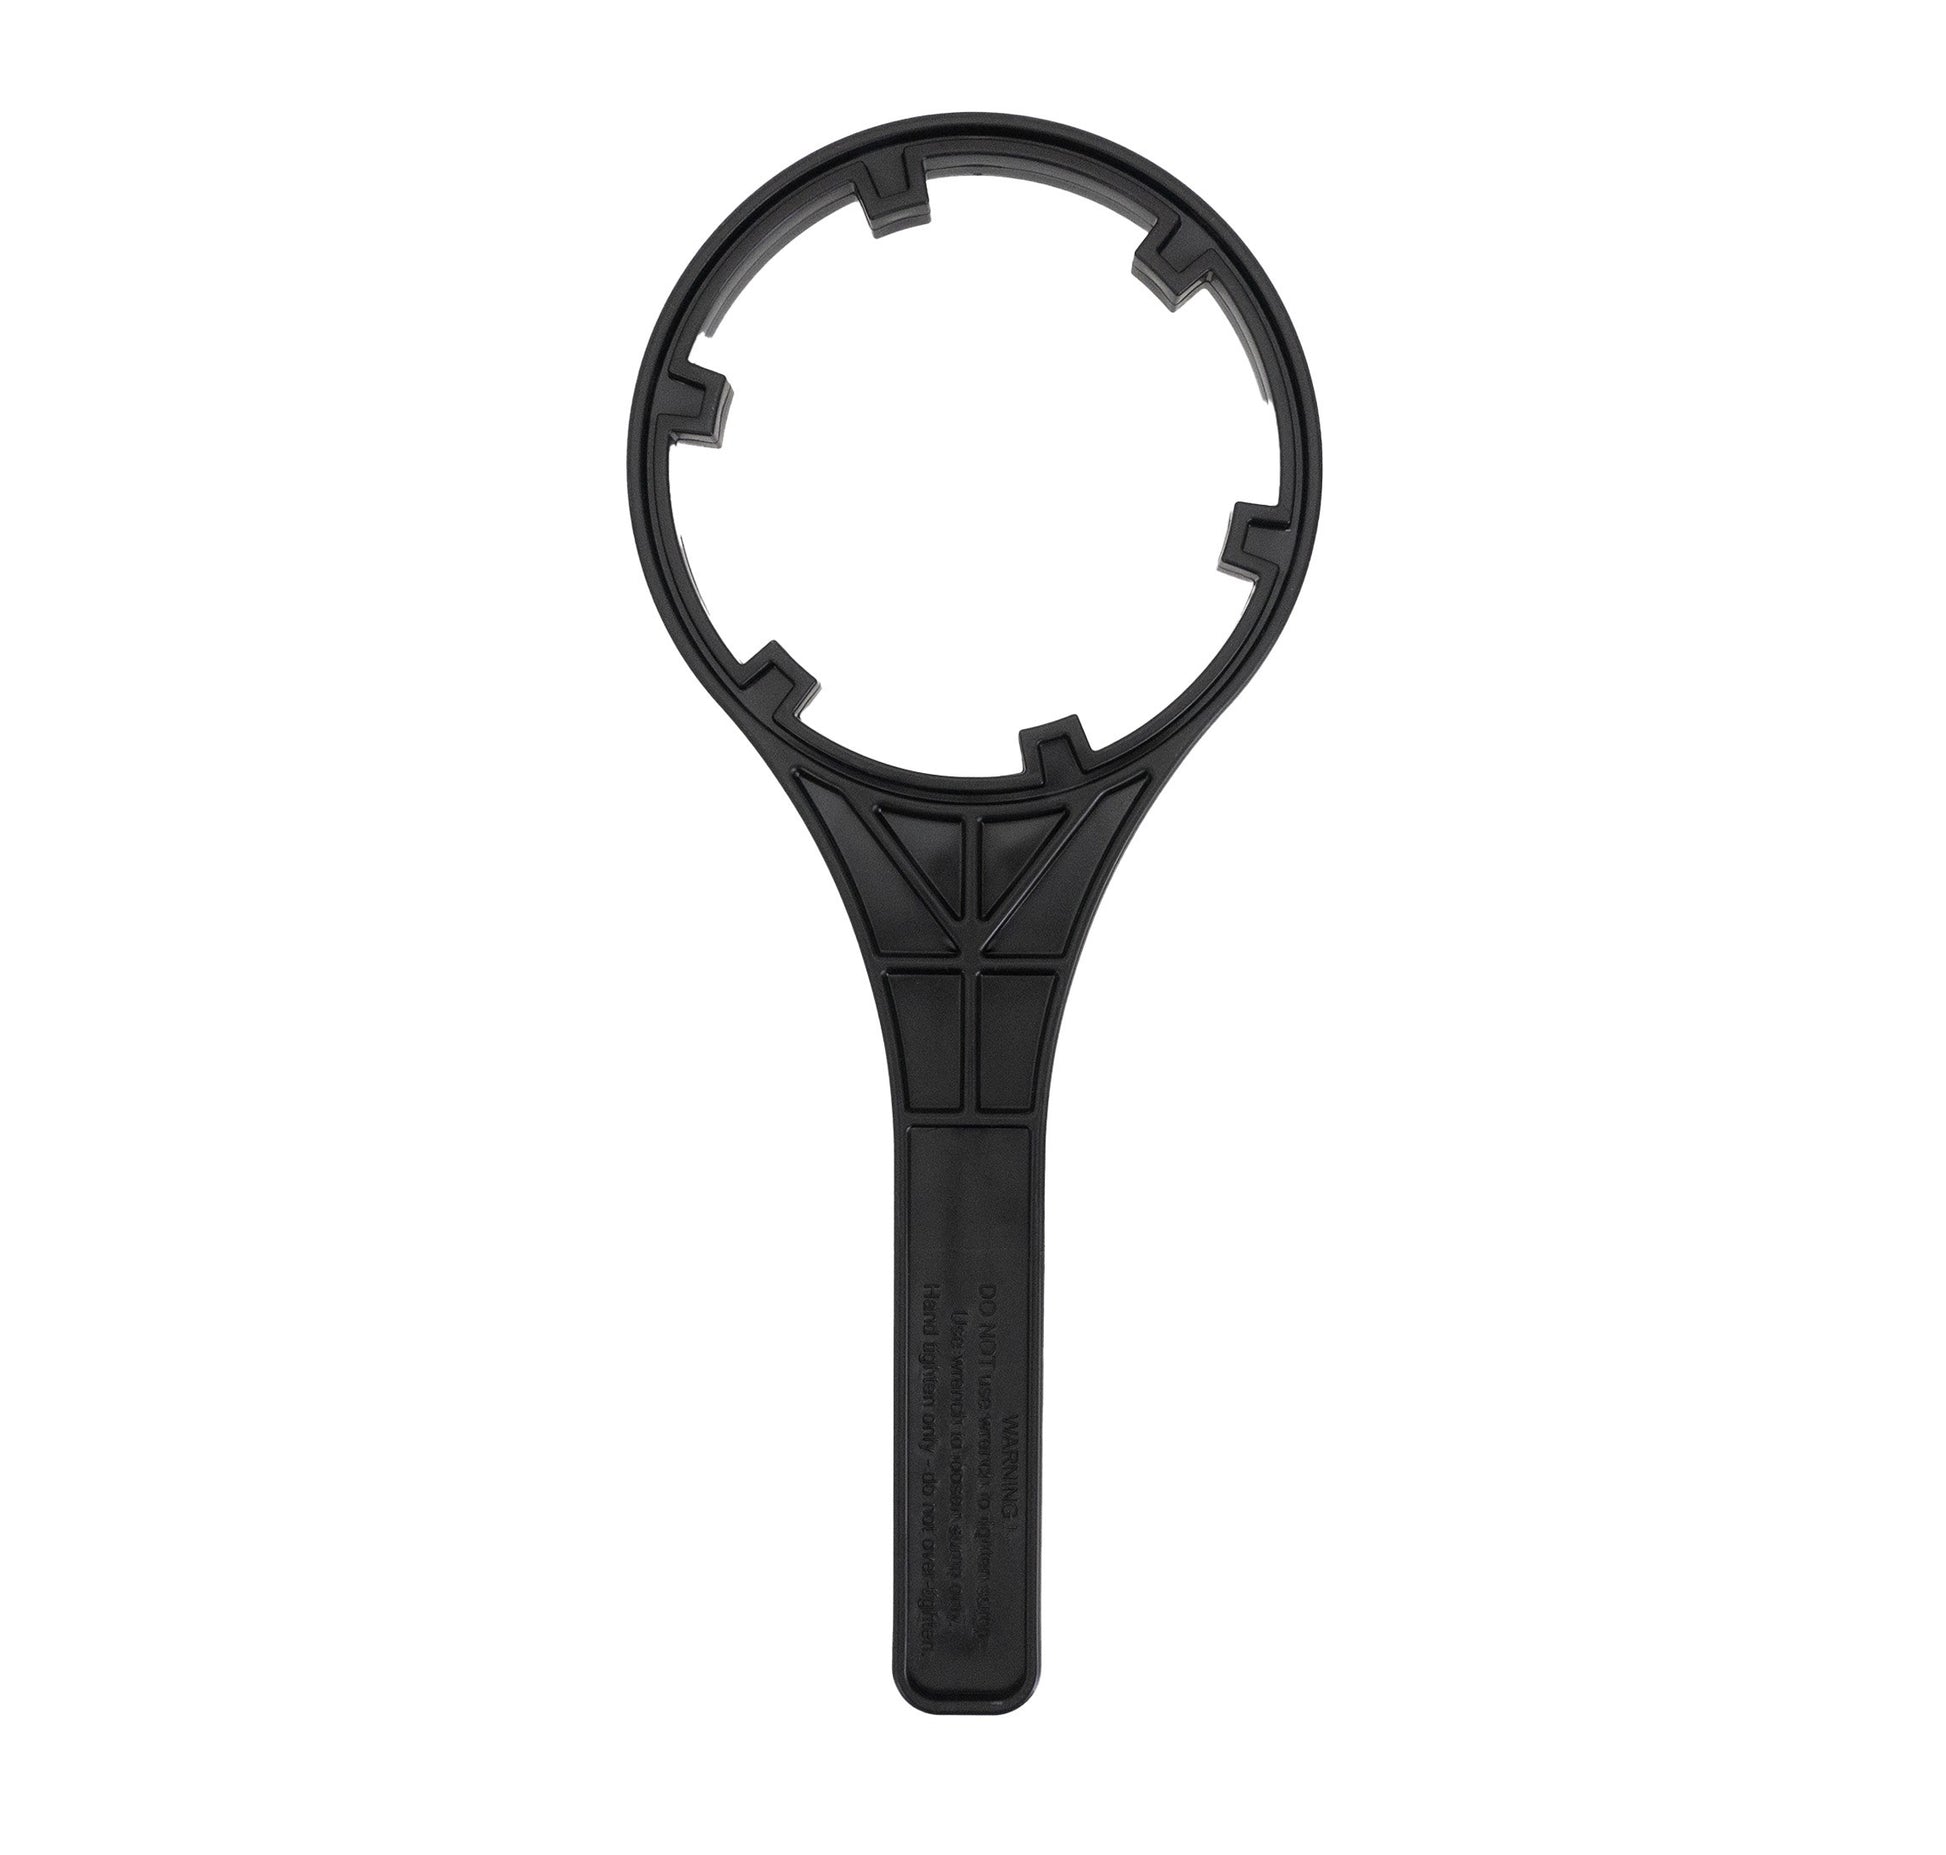 Pure Water Power Slimline Filter Wrench Product View